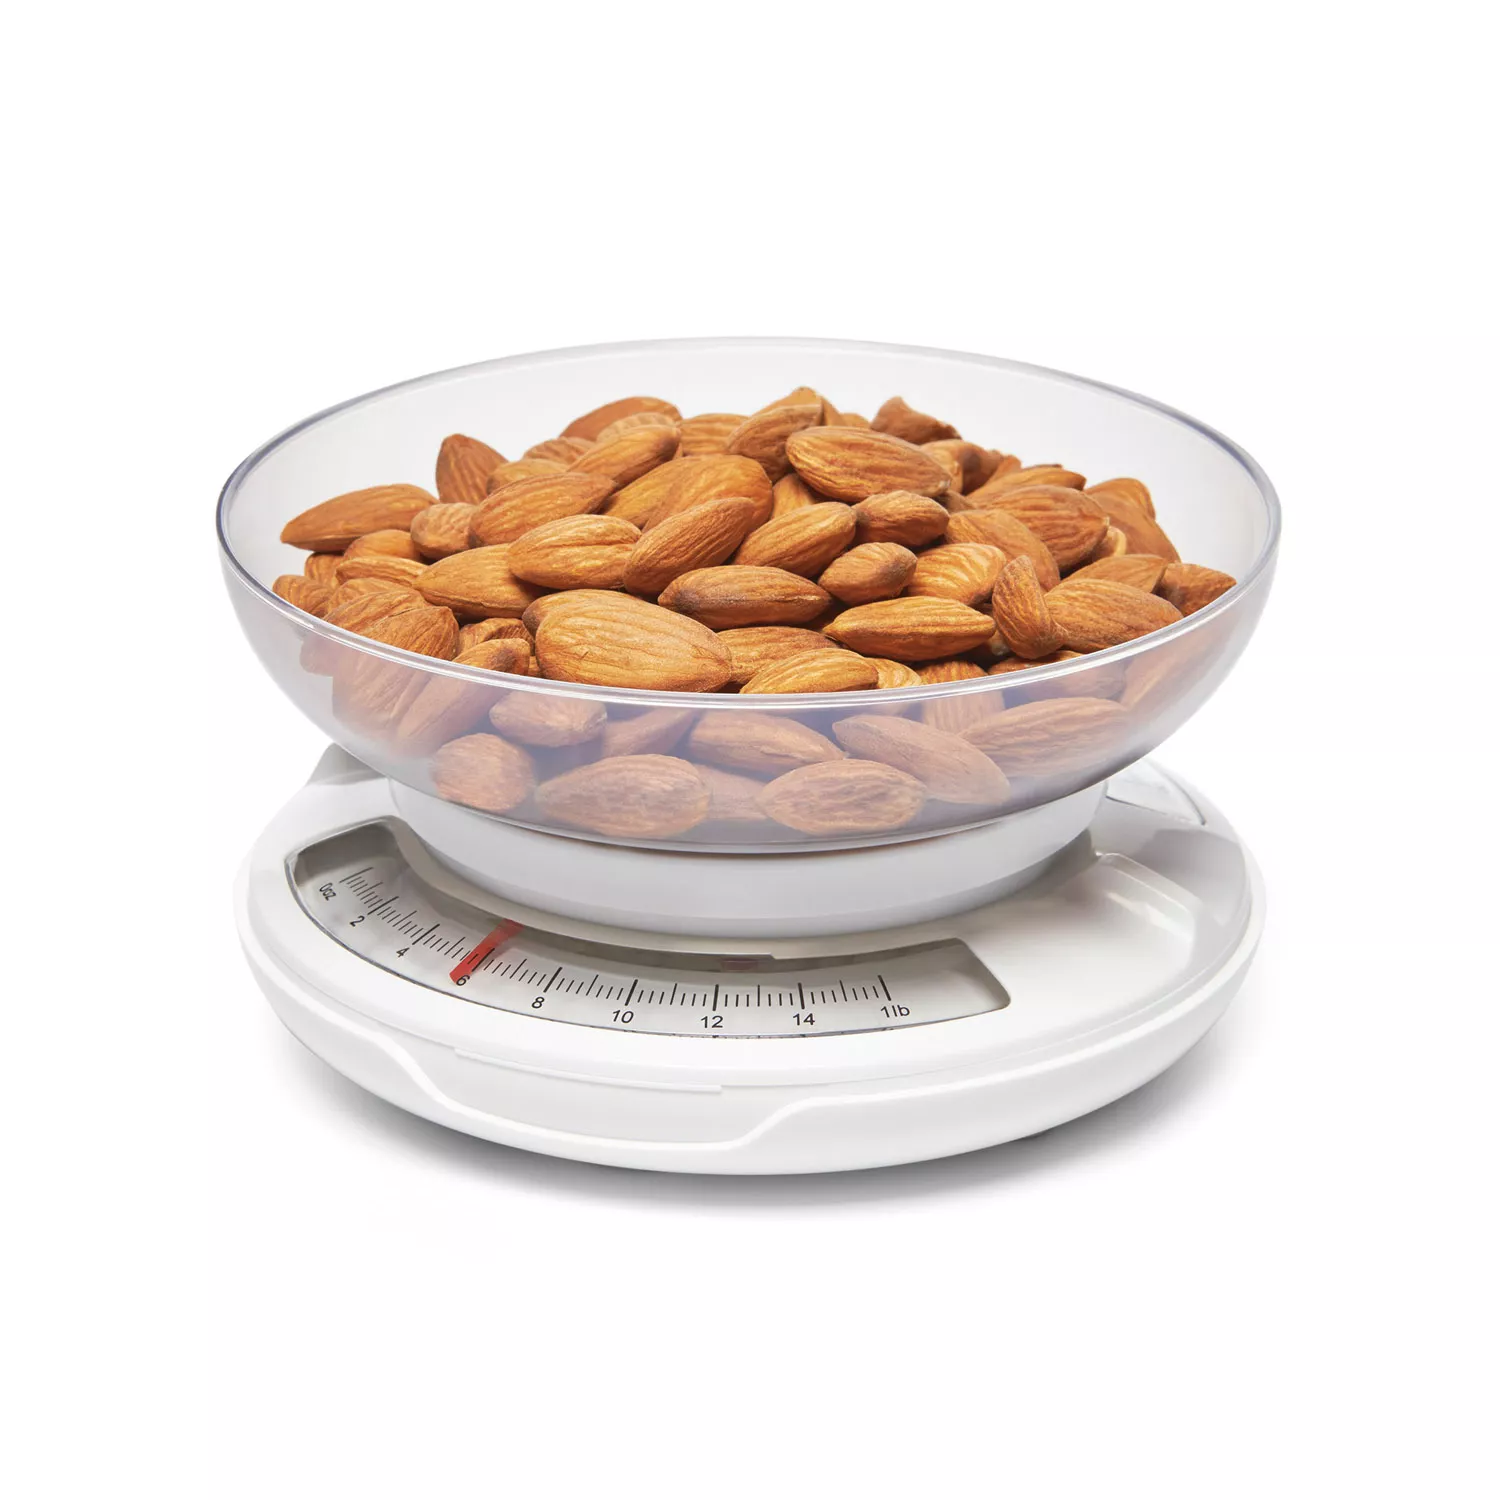 OXO Good Grips 1-Pound Healthy Portions Scale